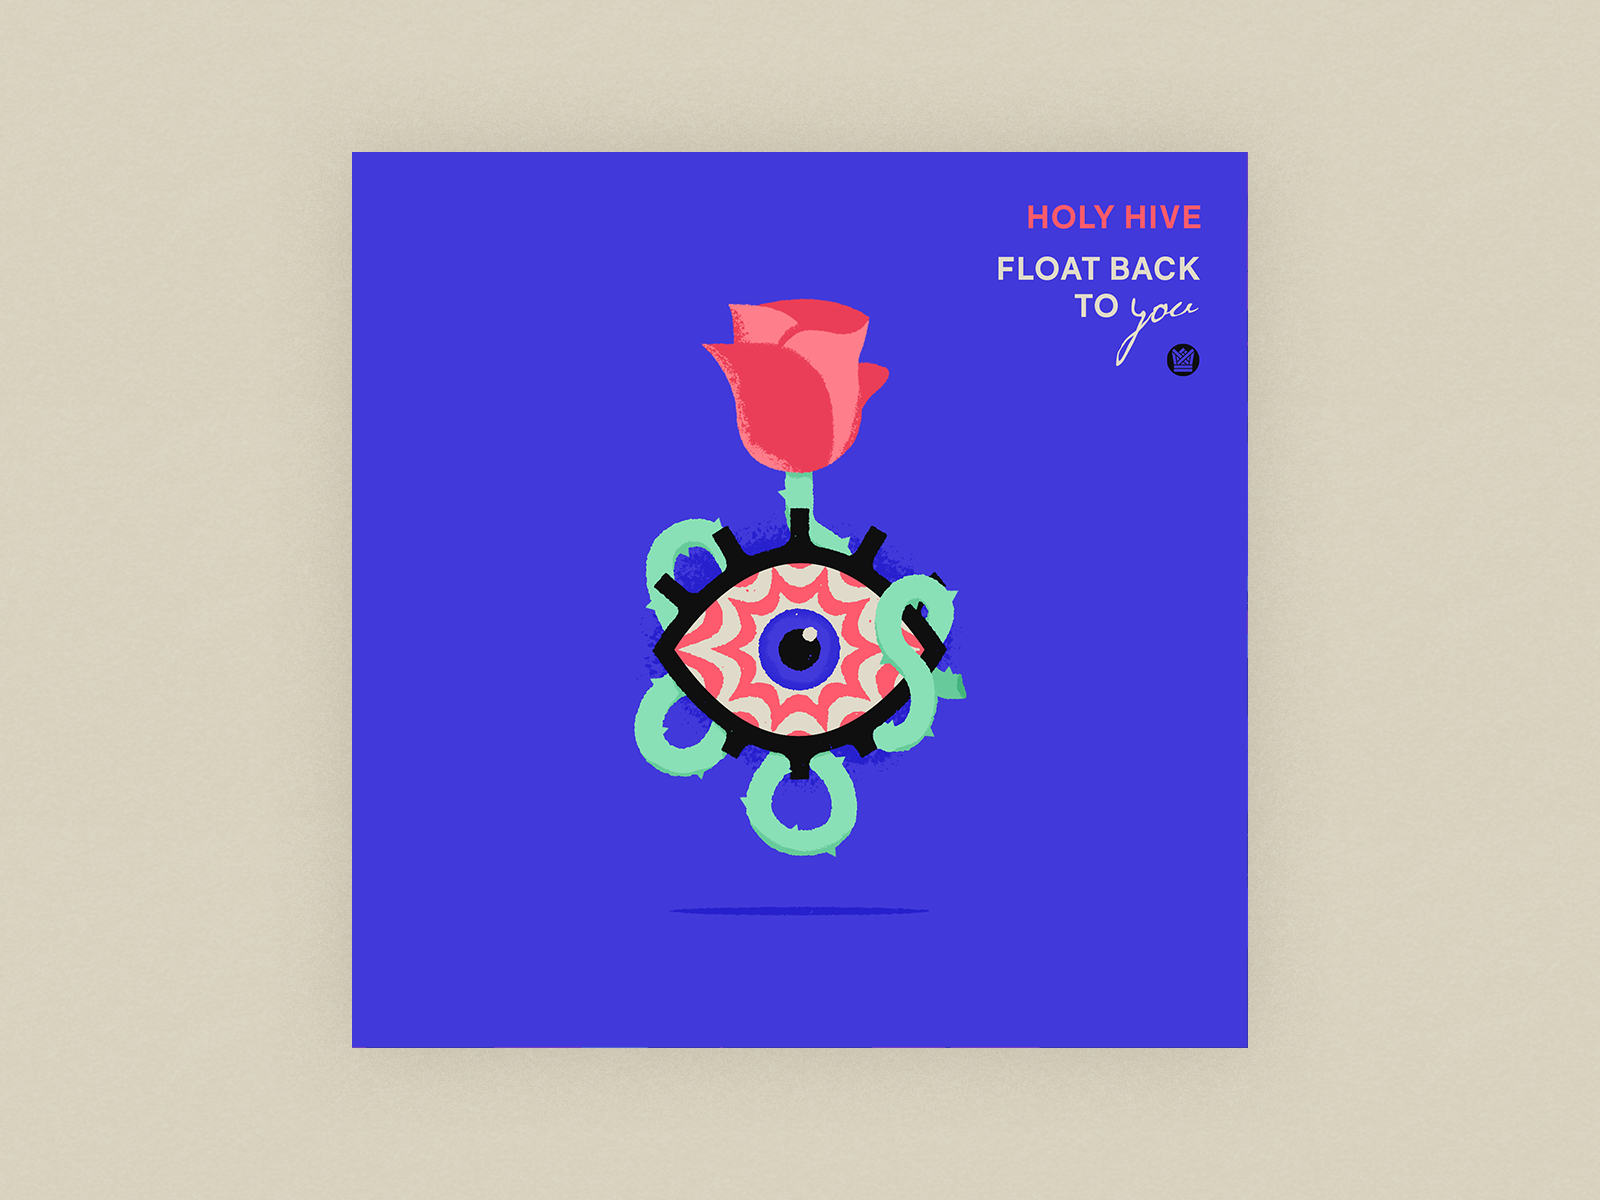 10x20 - 9: Float Back To You - Holy Hive 10x20 album album art band art eye floating gig poster holy hive hypnosis hypnotic illustration music record rose thorn vinyl